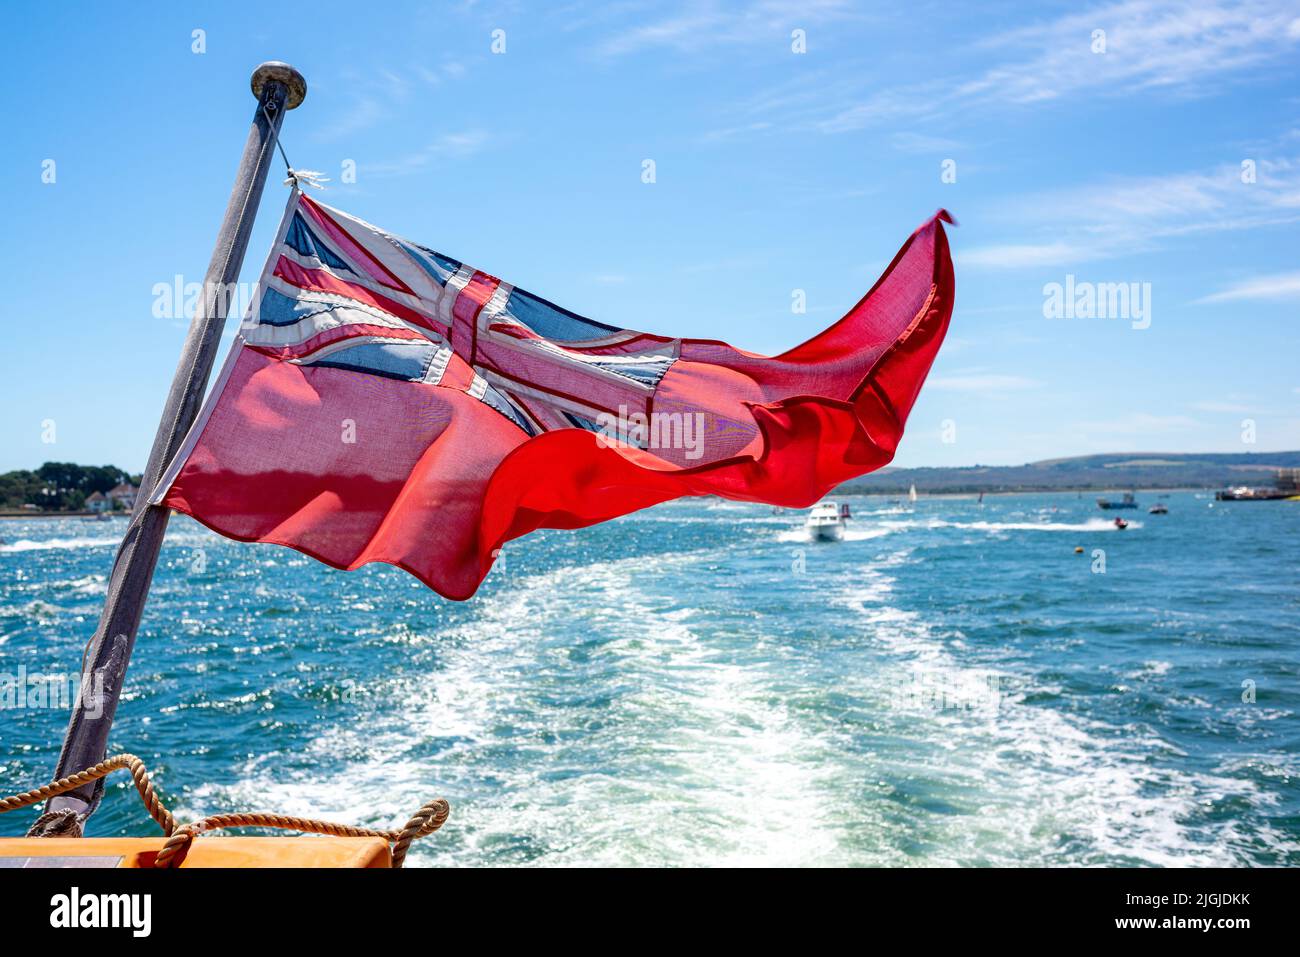 Red Ensign flag blowing in wind on the stern of a boat Stock Photo